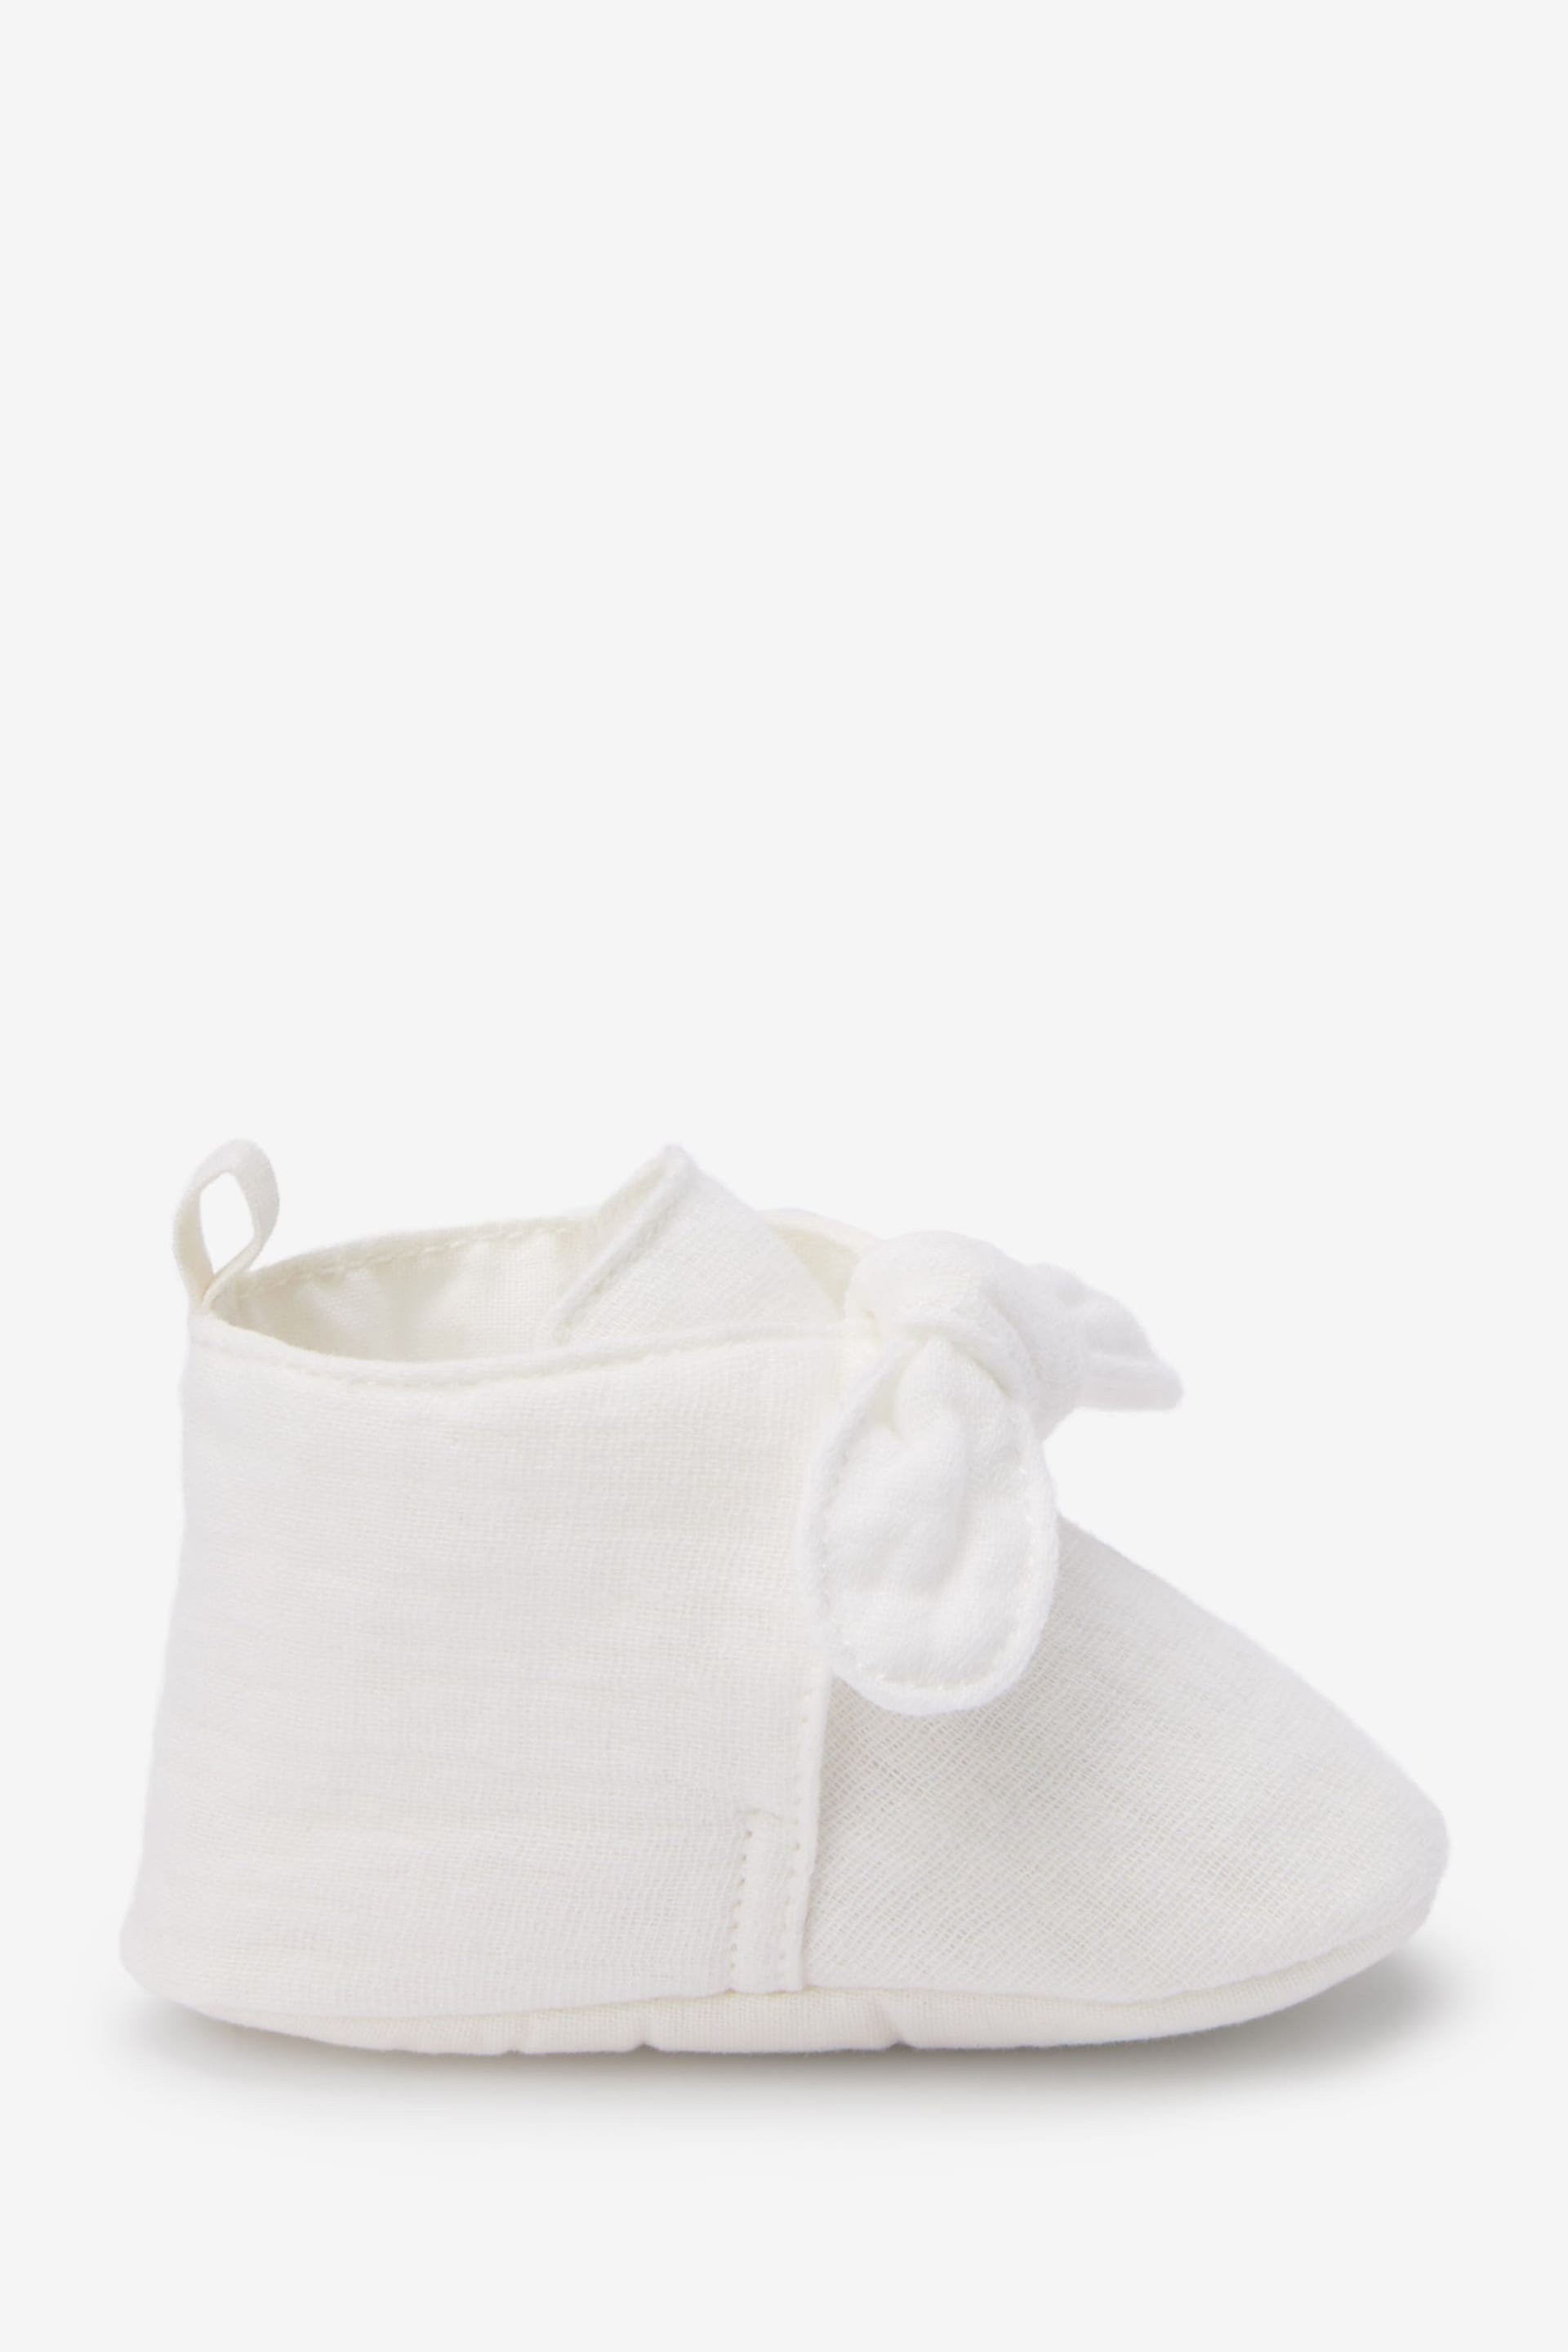 White Bootie Baby Shoes (0-18mths) - Image 1 of 6